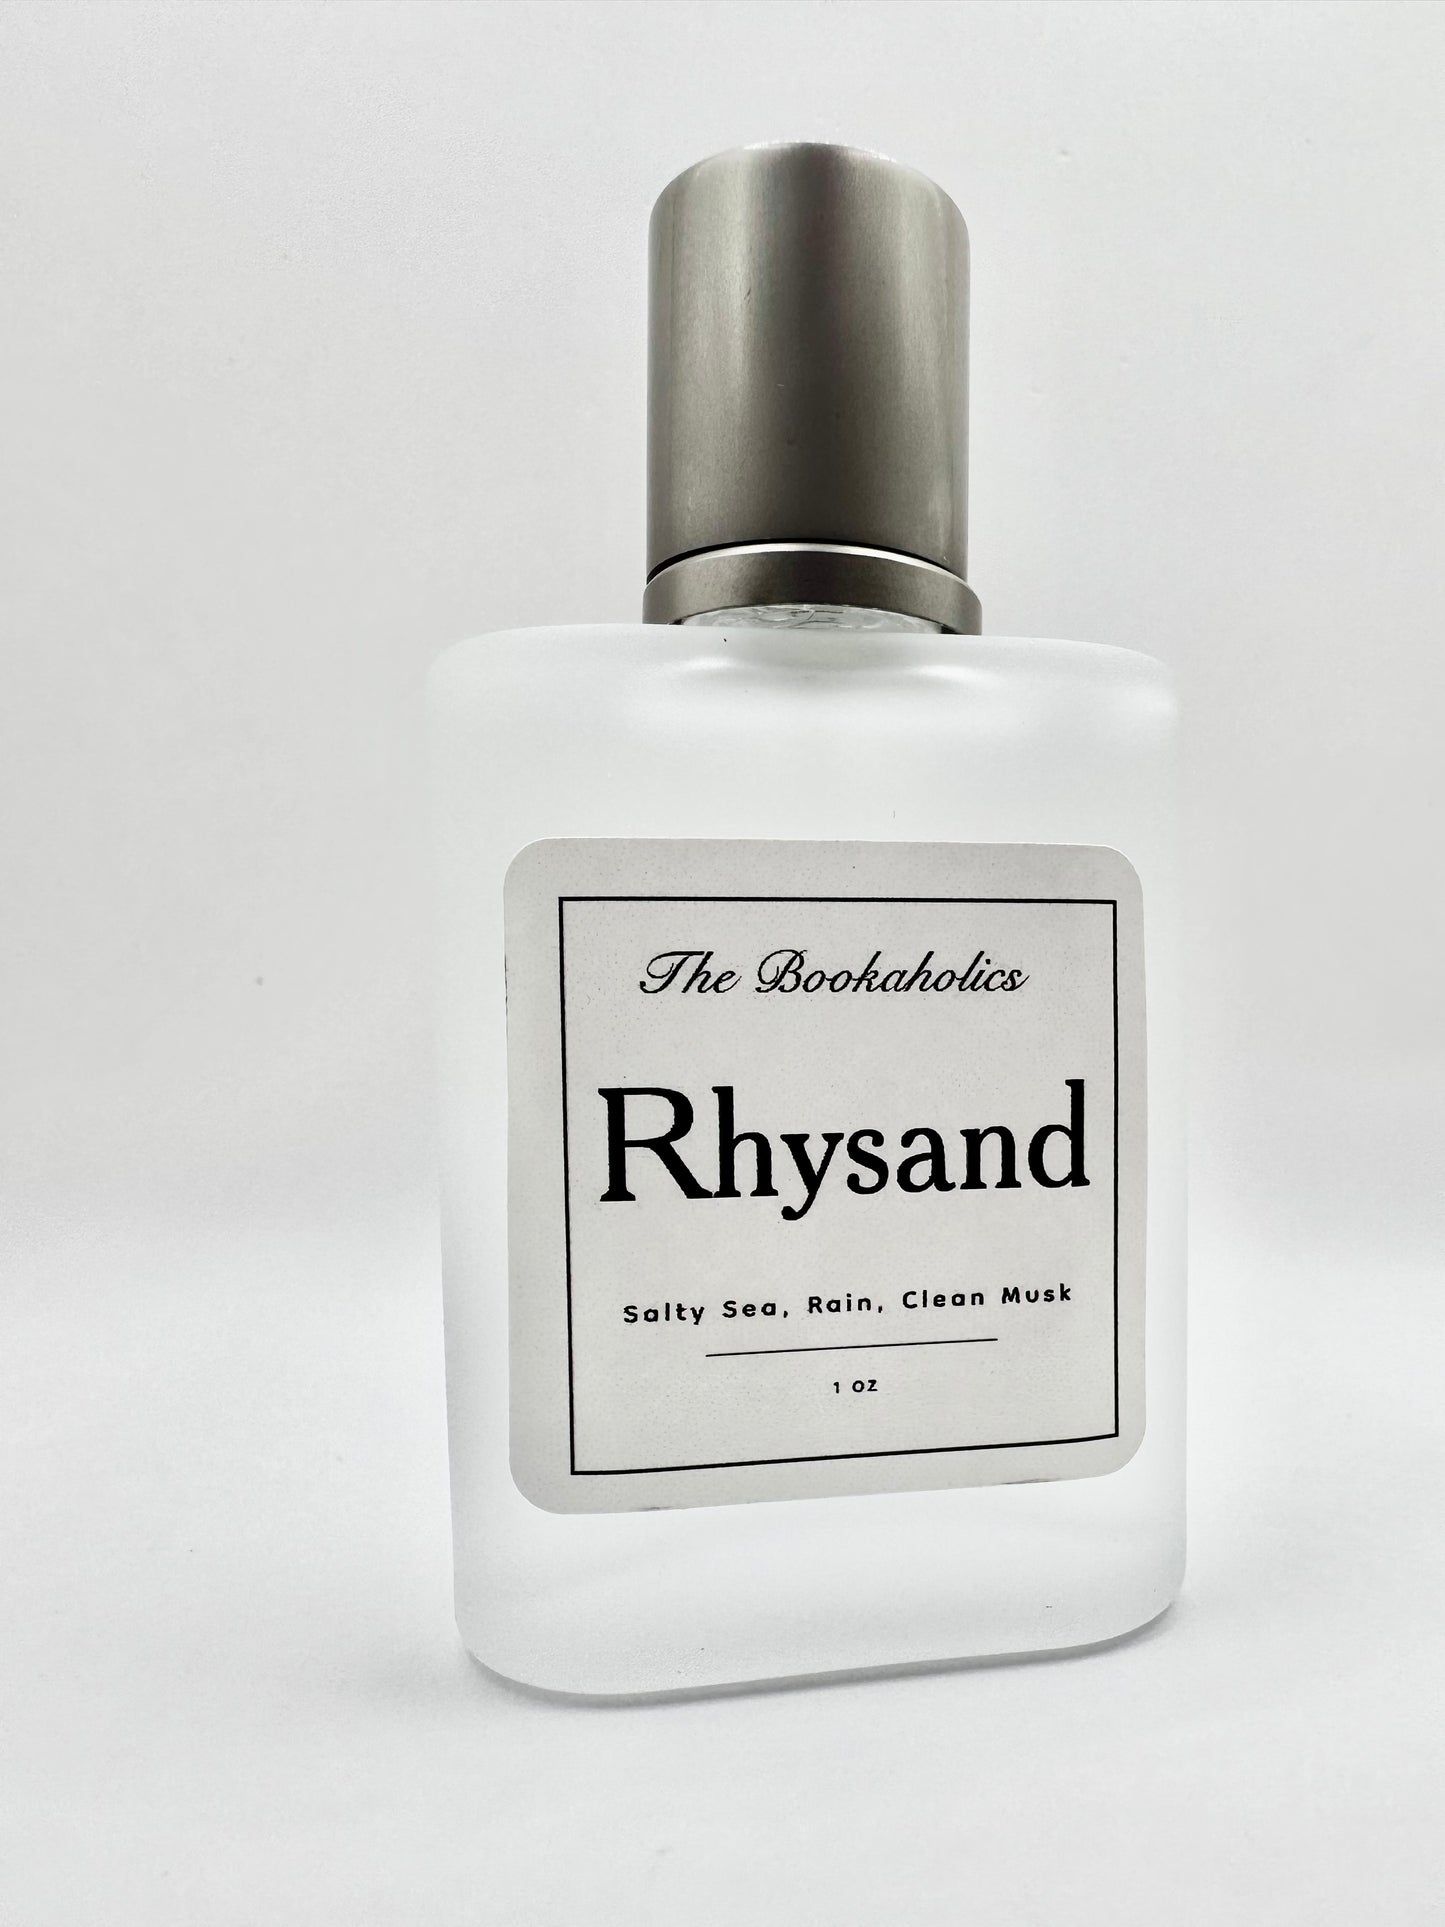 Rhysand: Cologne inspired by Rhysand from A Court of Thorns and Roses